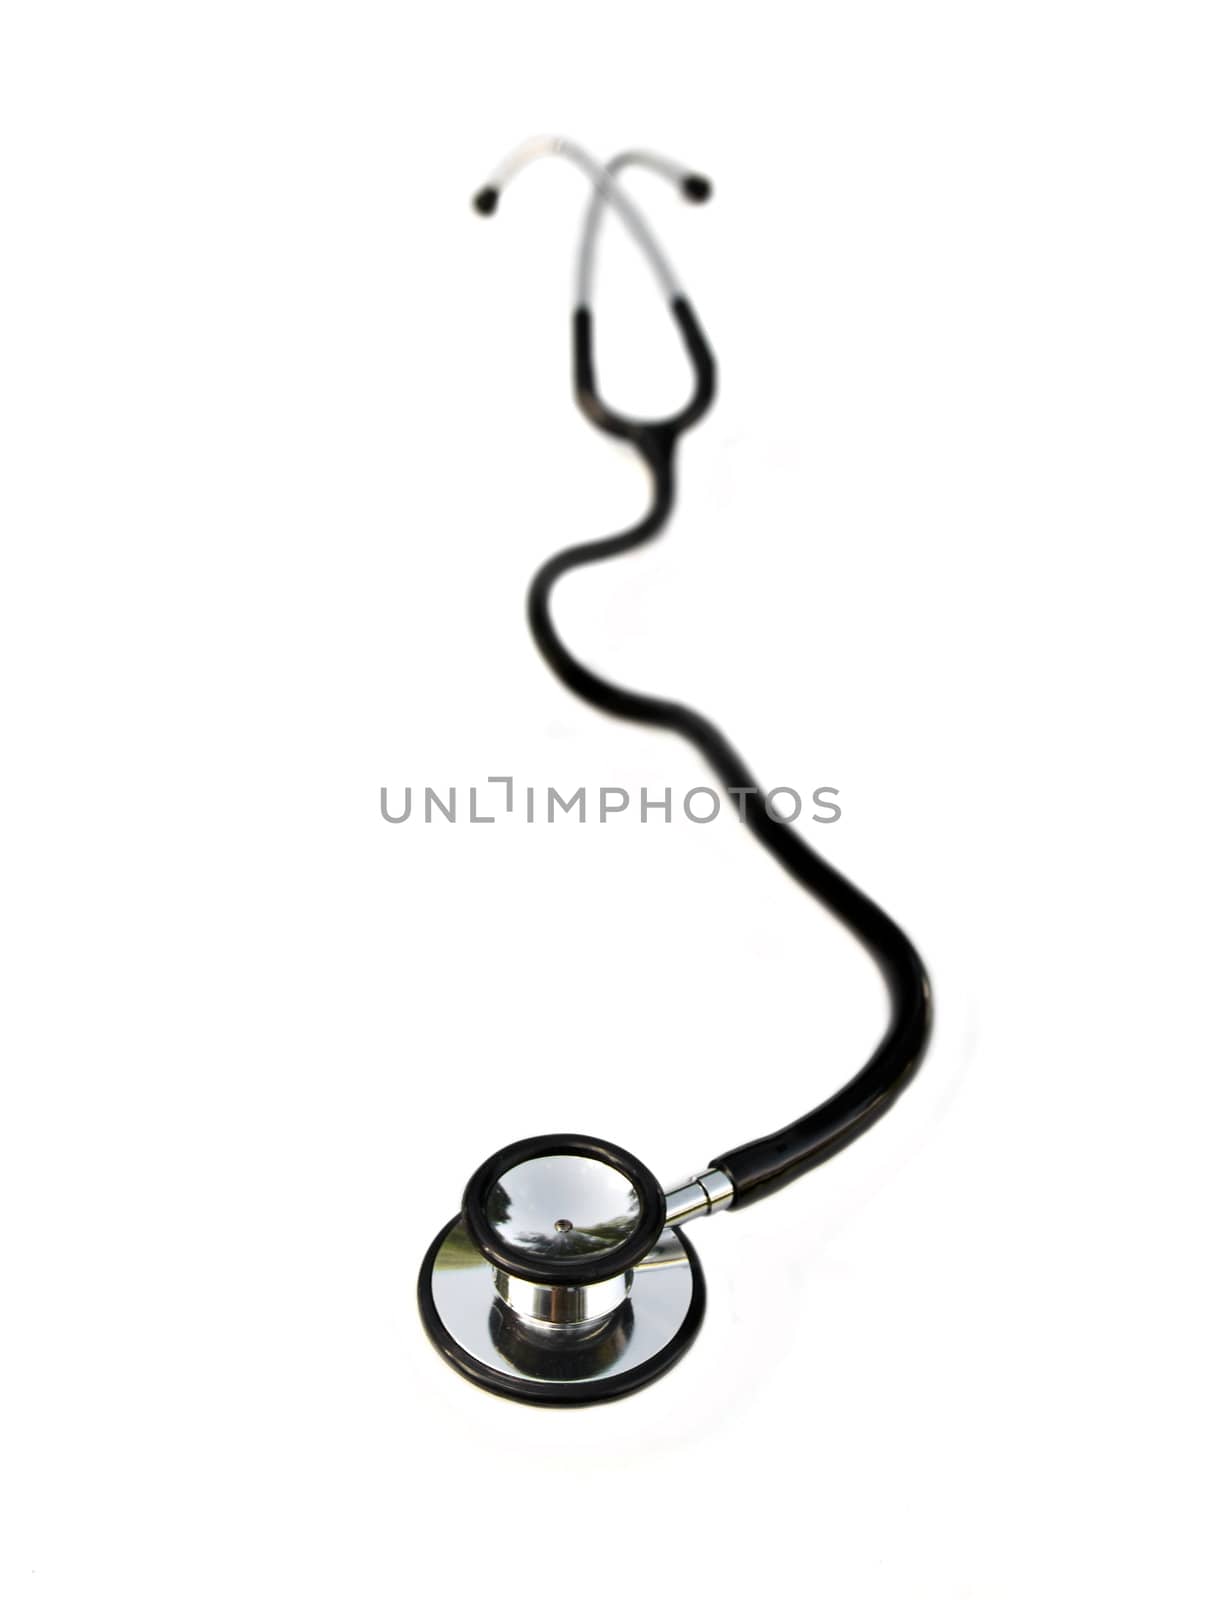 stethoscope on white by clearviewstock